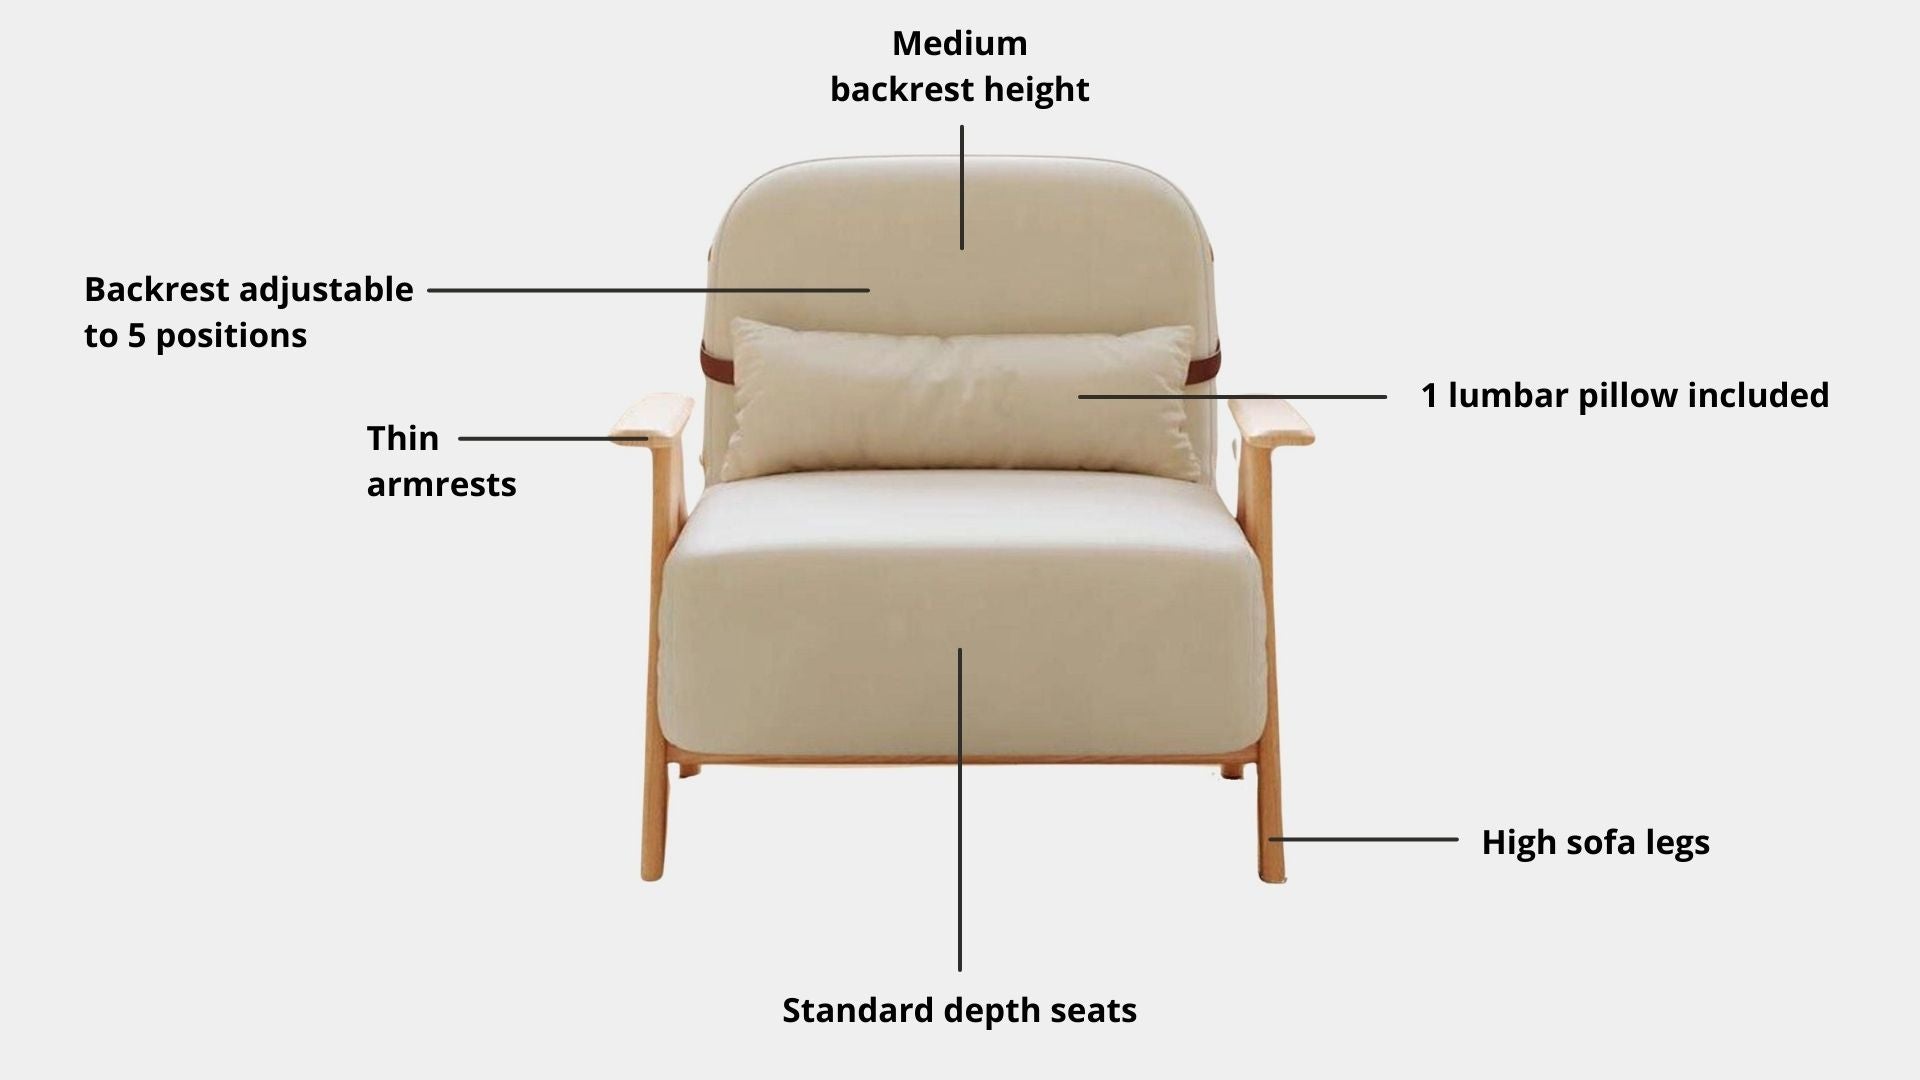 Key features such as armrest thickness, cushion height, seat depth and sofa leg height for Corona Fabric Sofa Bed